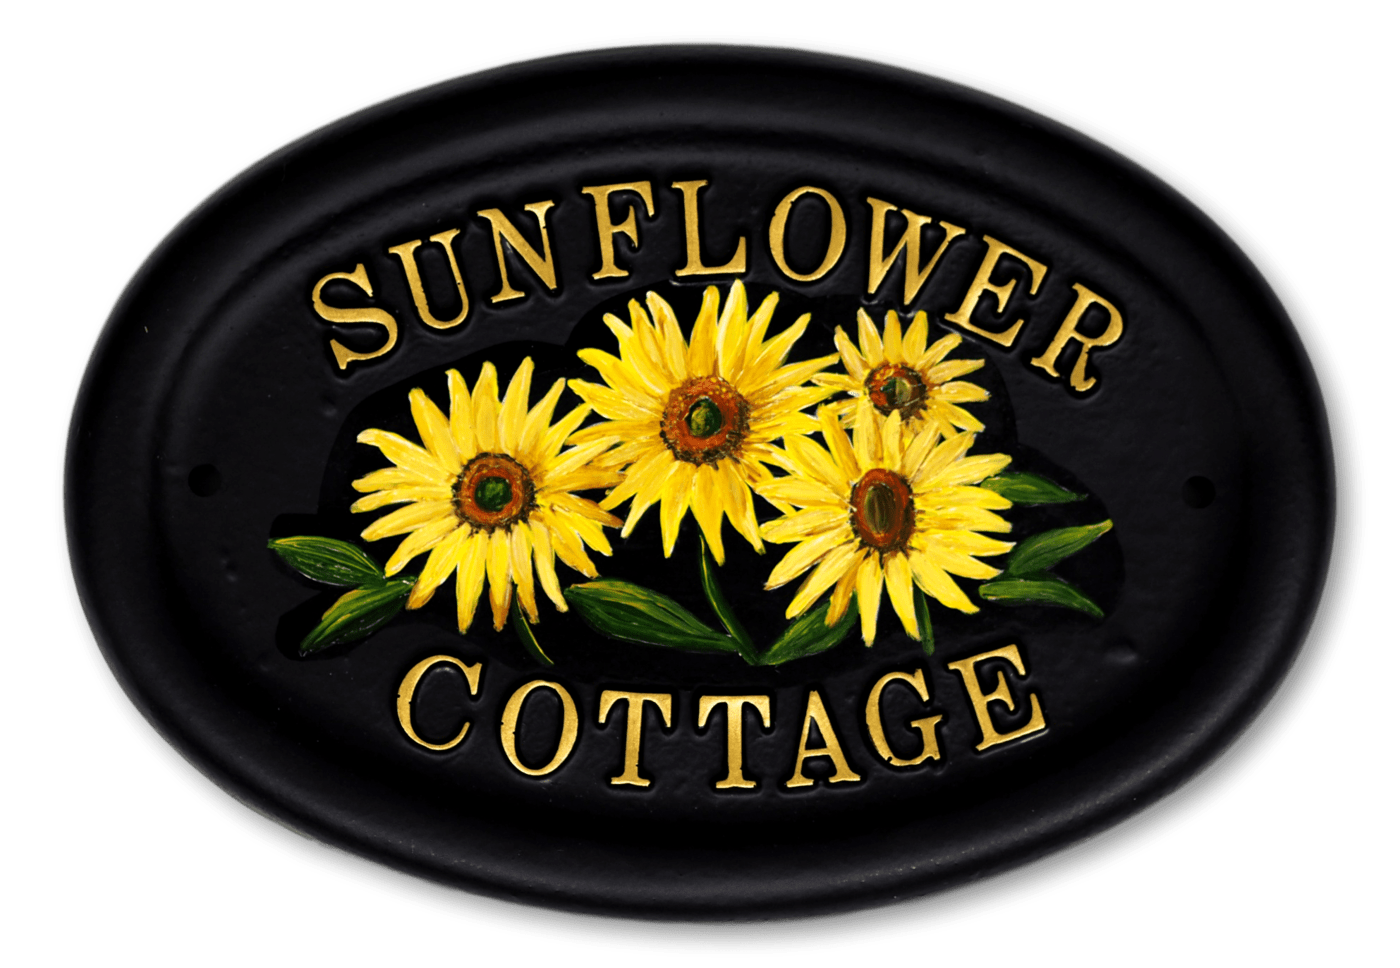 Sunflowers house sign